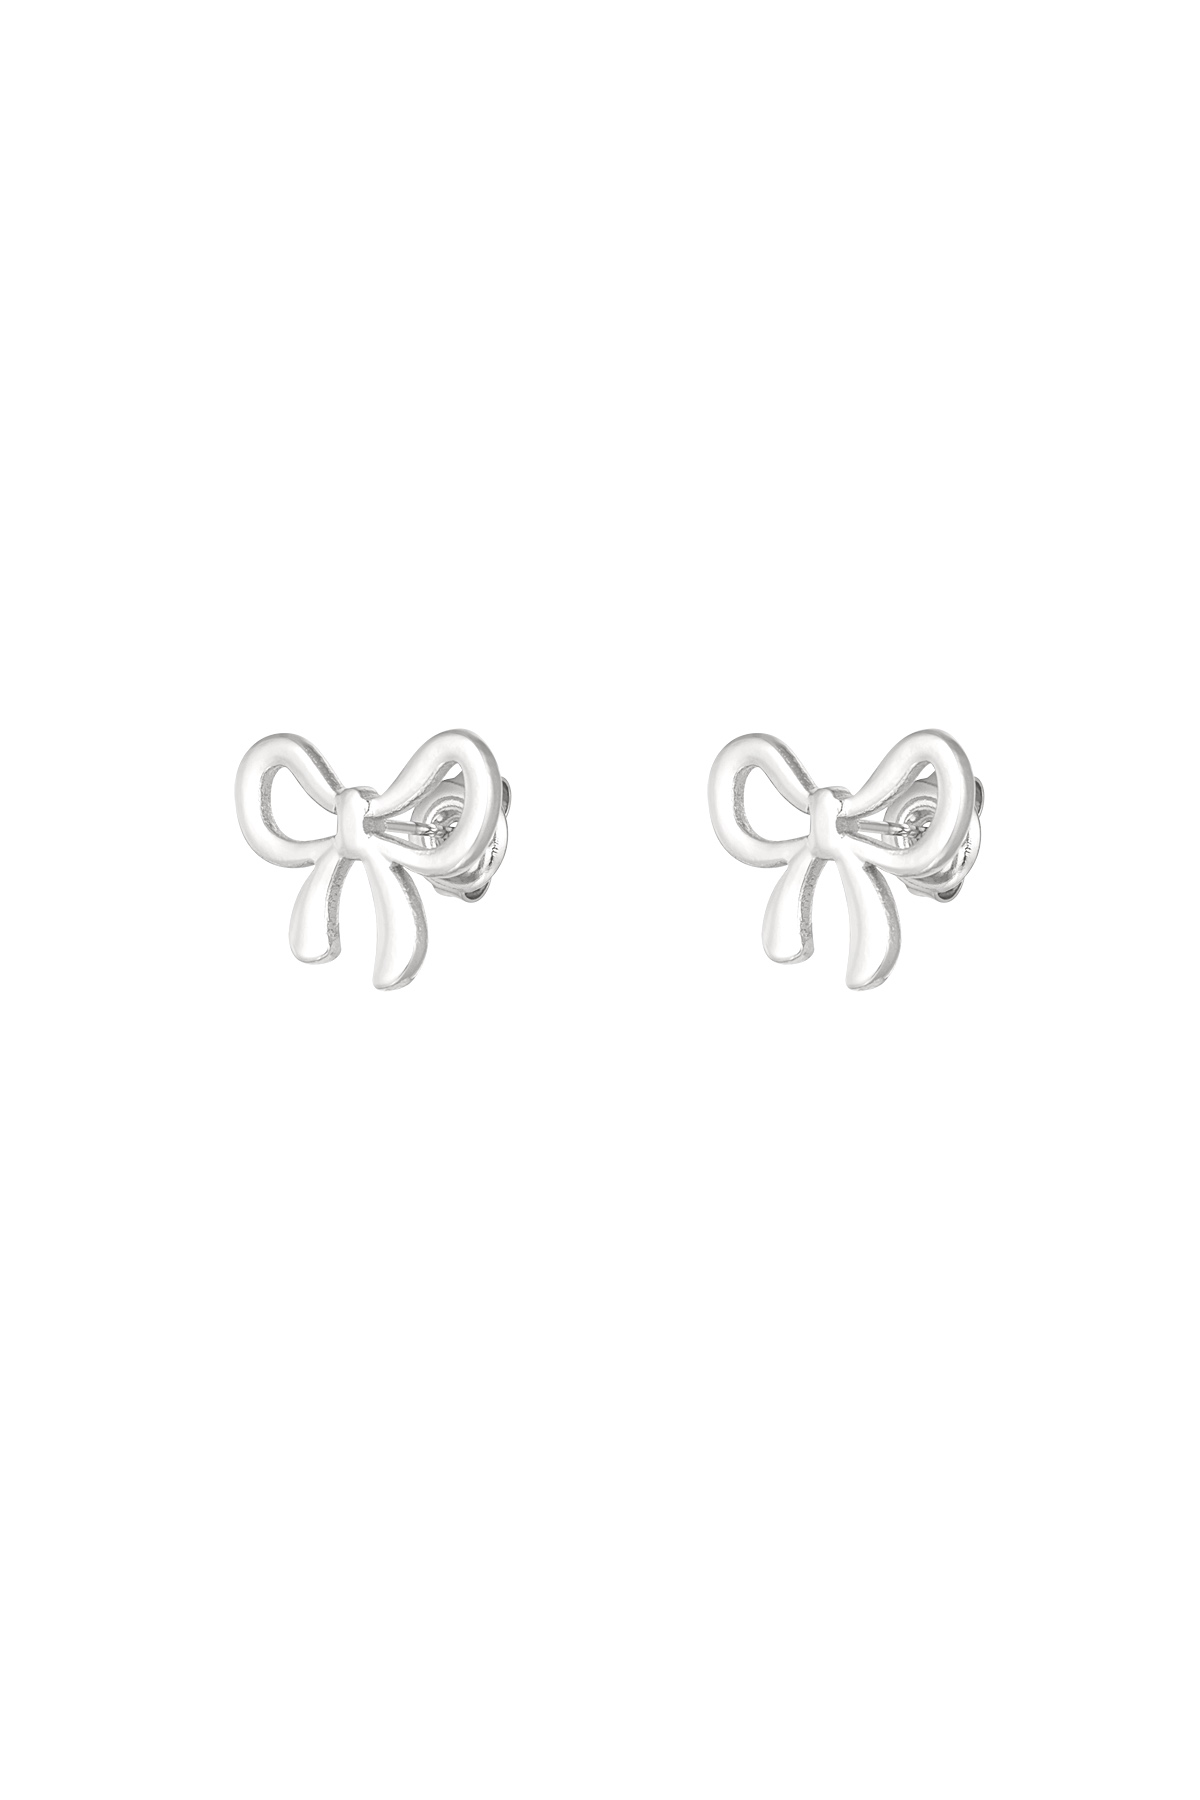 Stainless Steel Bowknot Earring - Silver